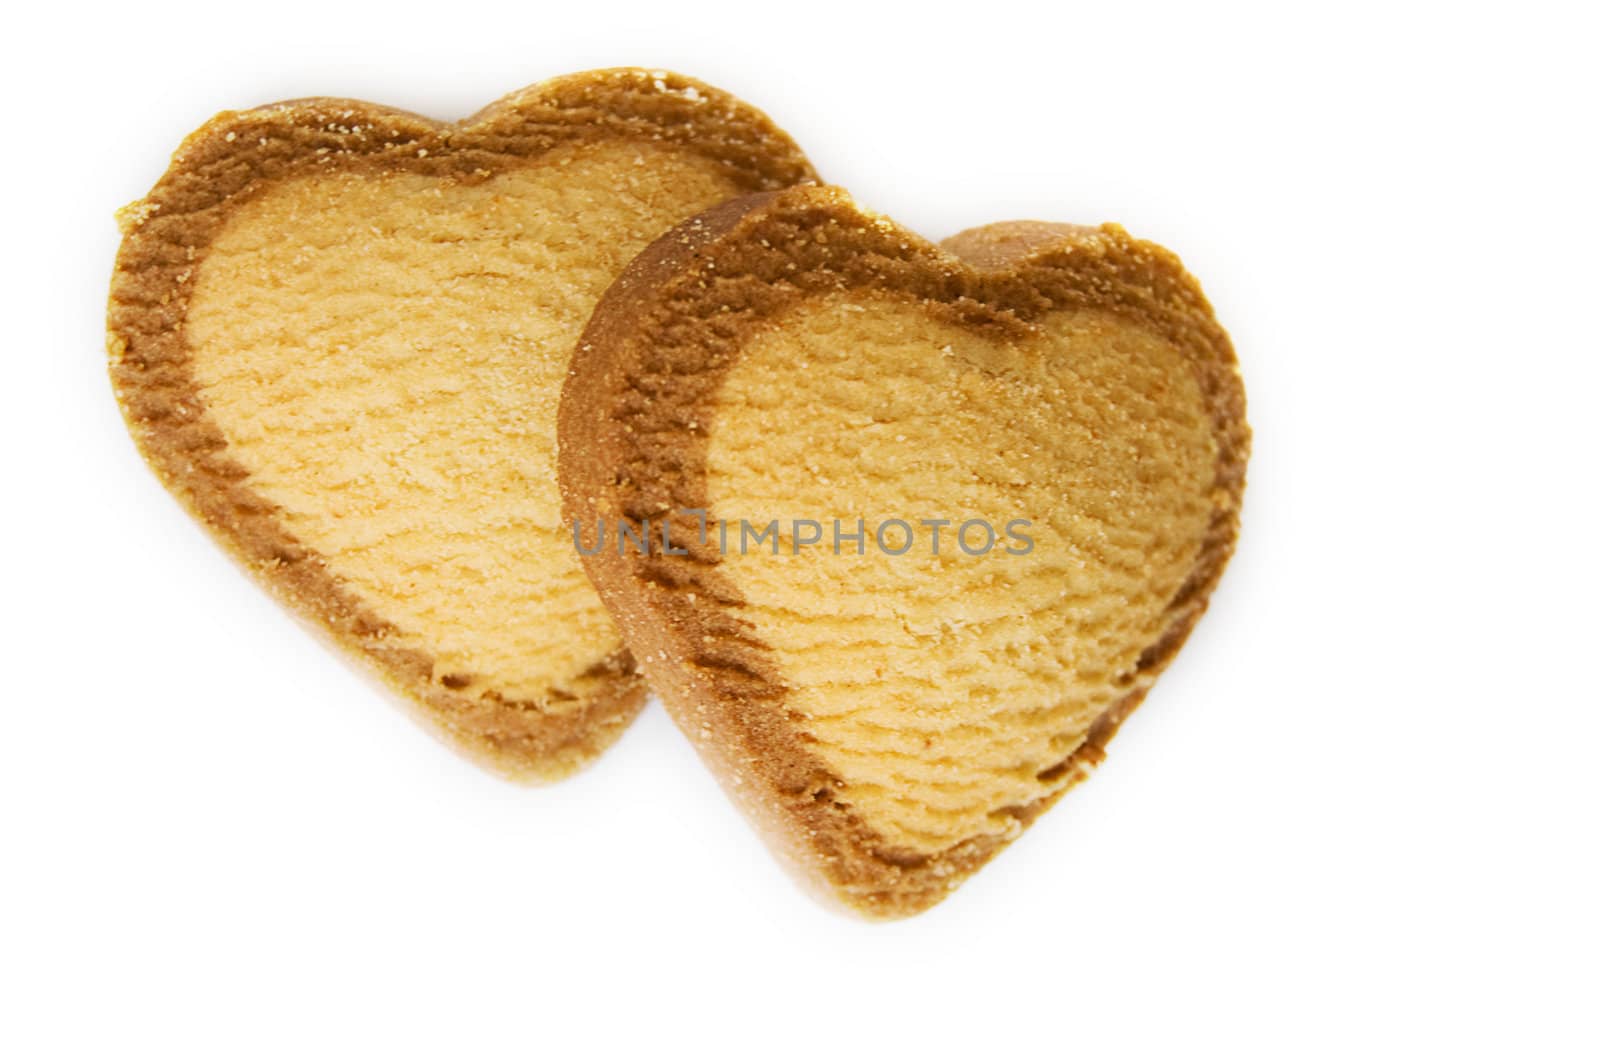 Two heart shaped biscuits over white